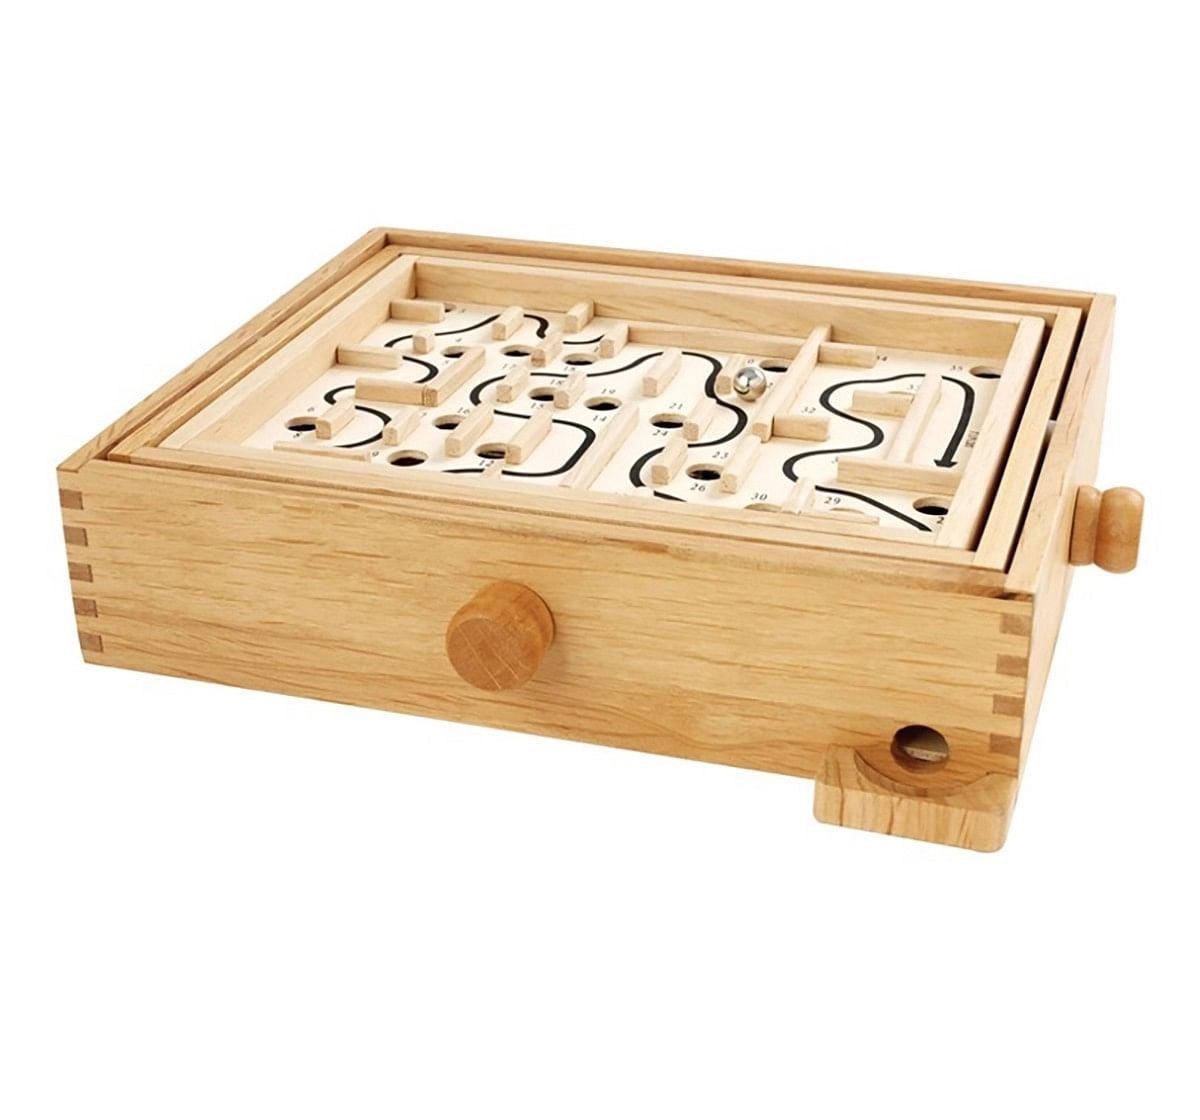  Hamleys Wooden Labyrinth  Board Games for Kids age 5Y+ 